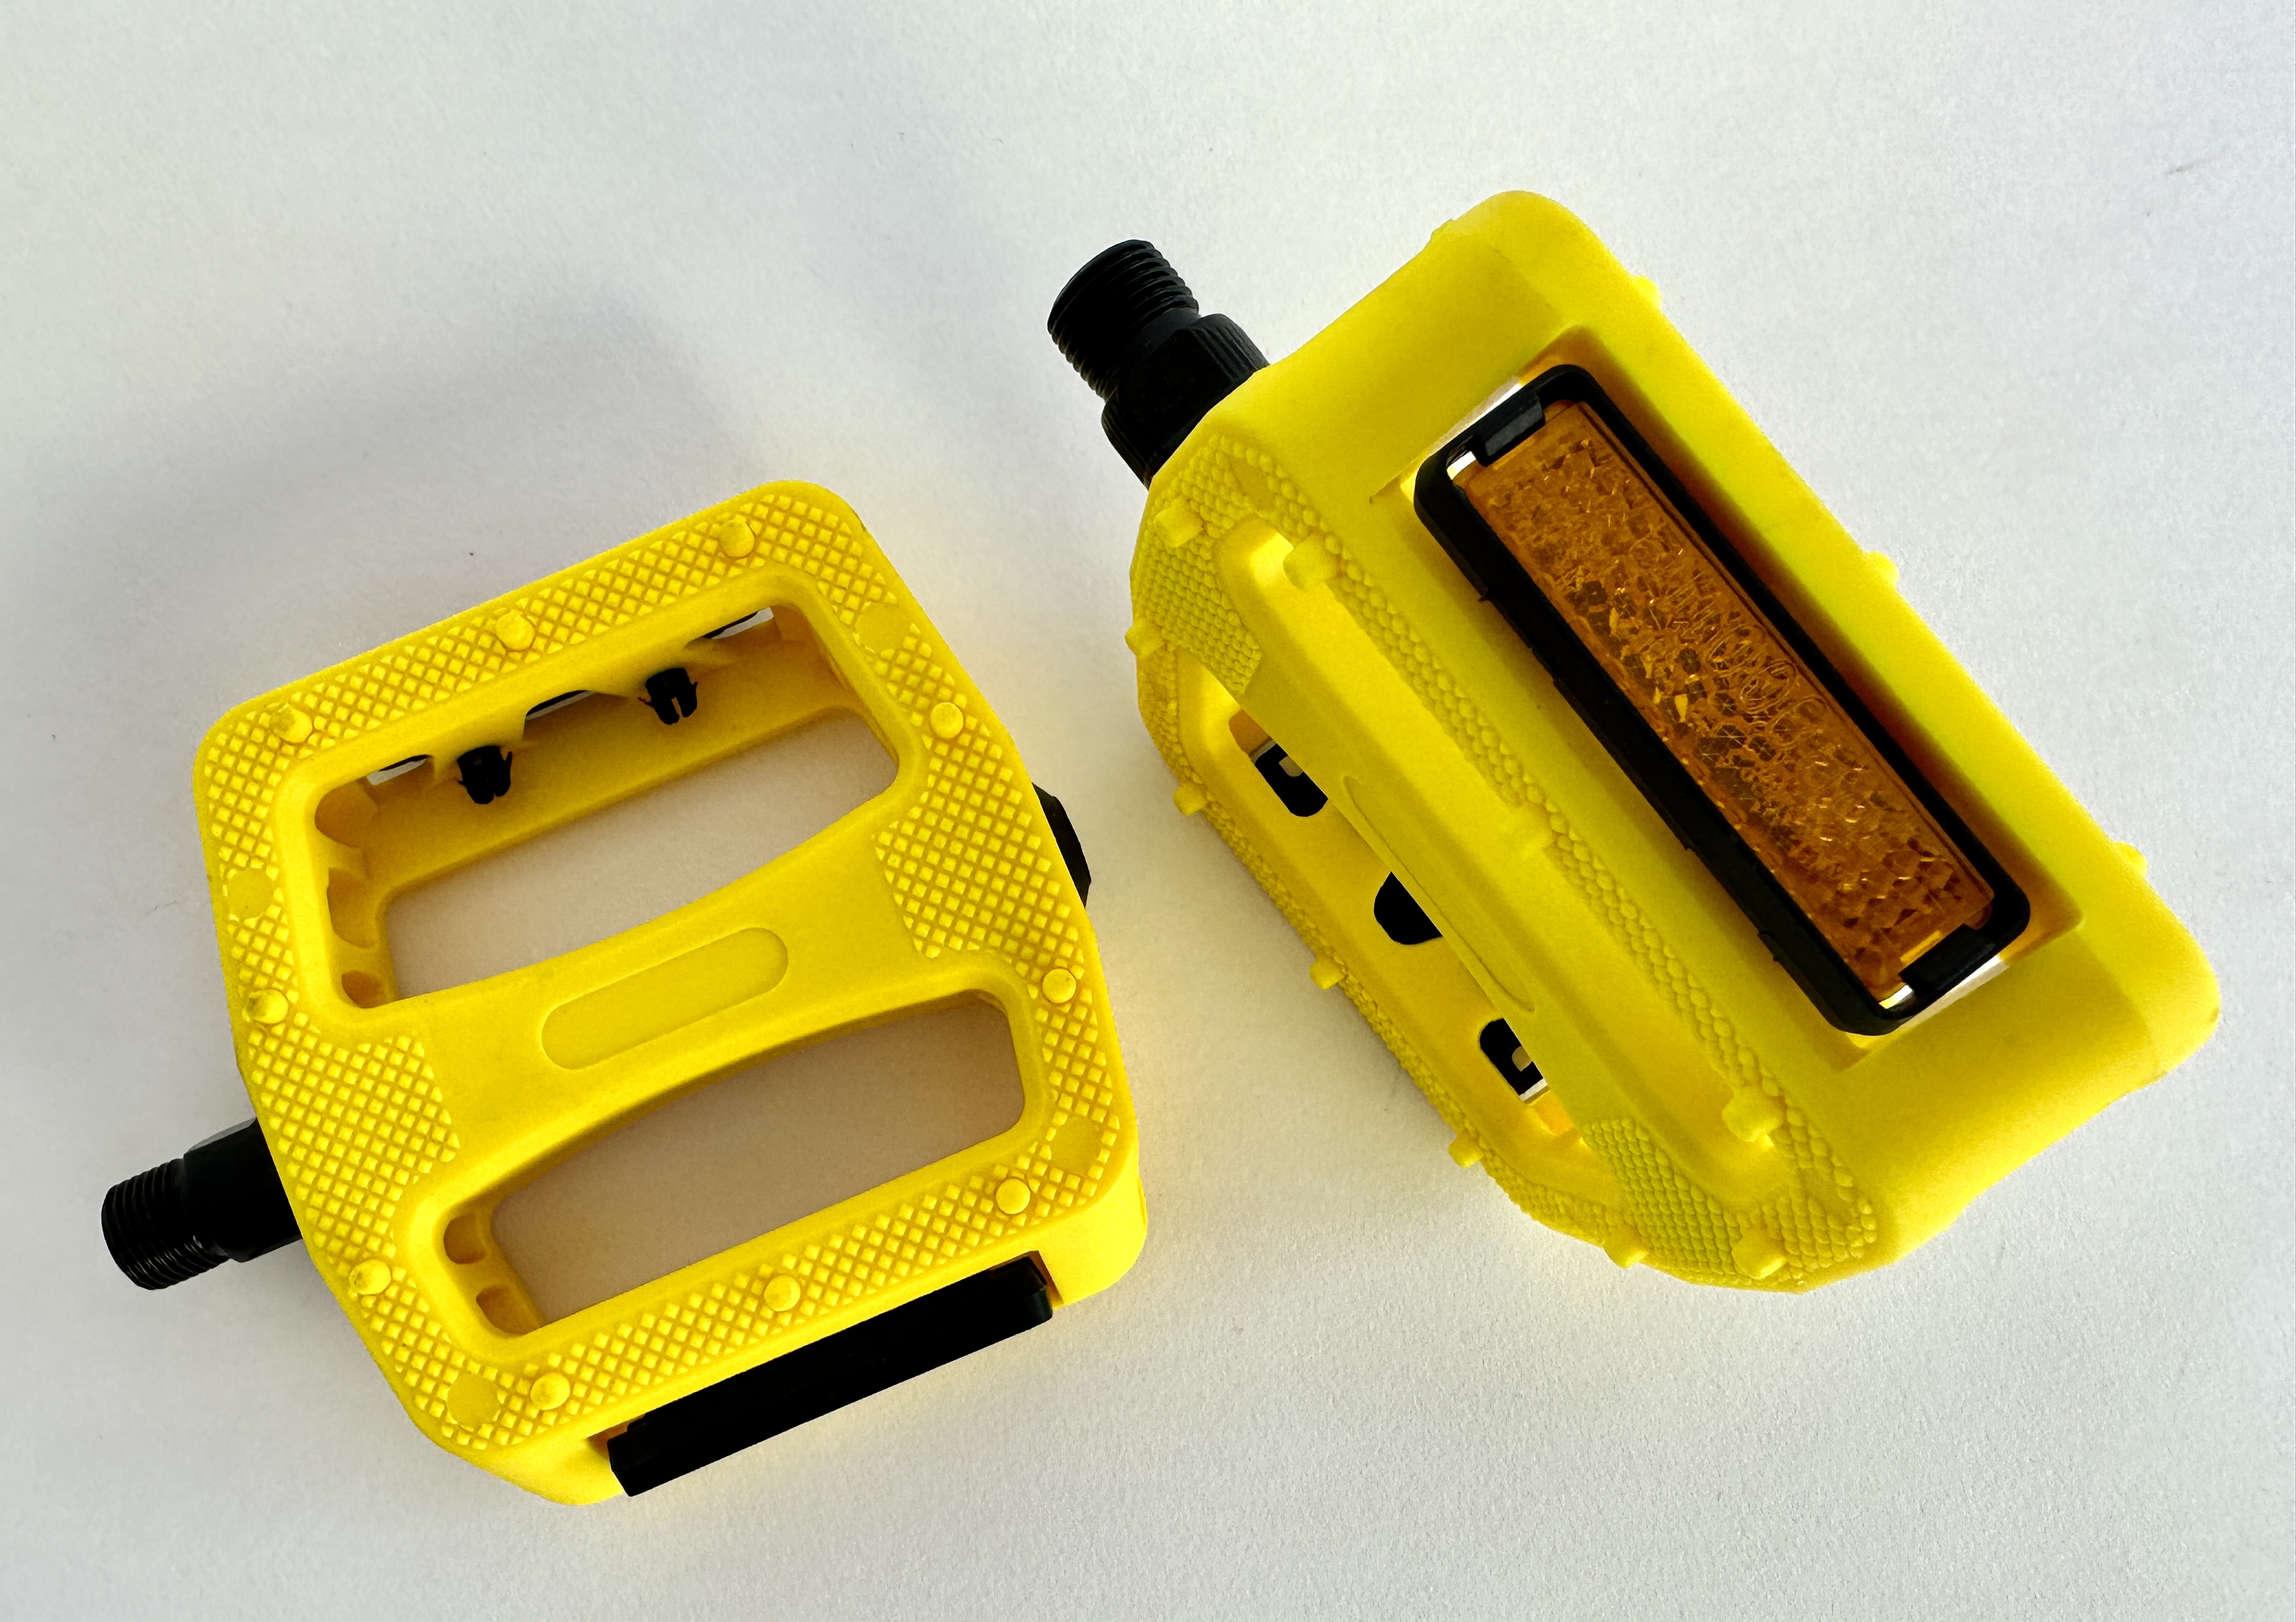 Pedals plastic 9/16 with reflectors, yellow